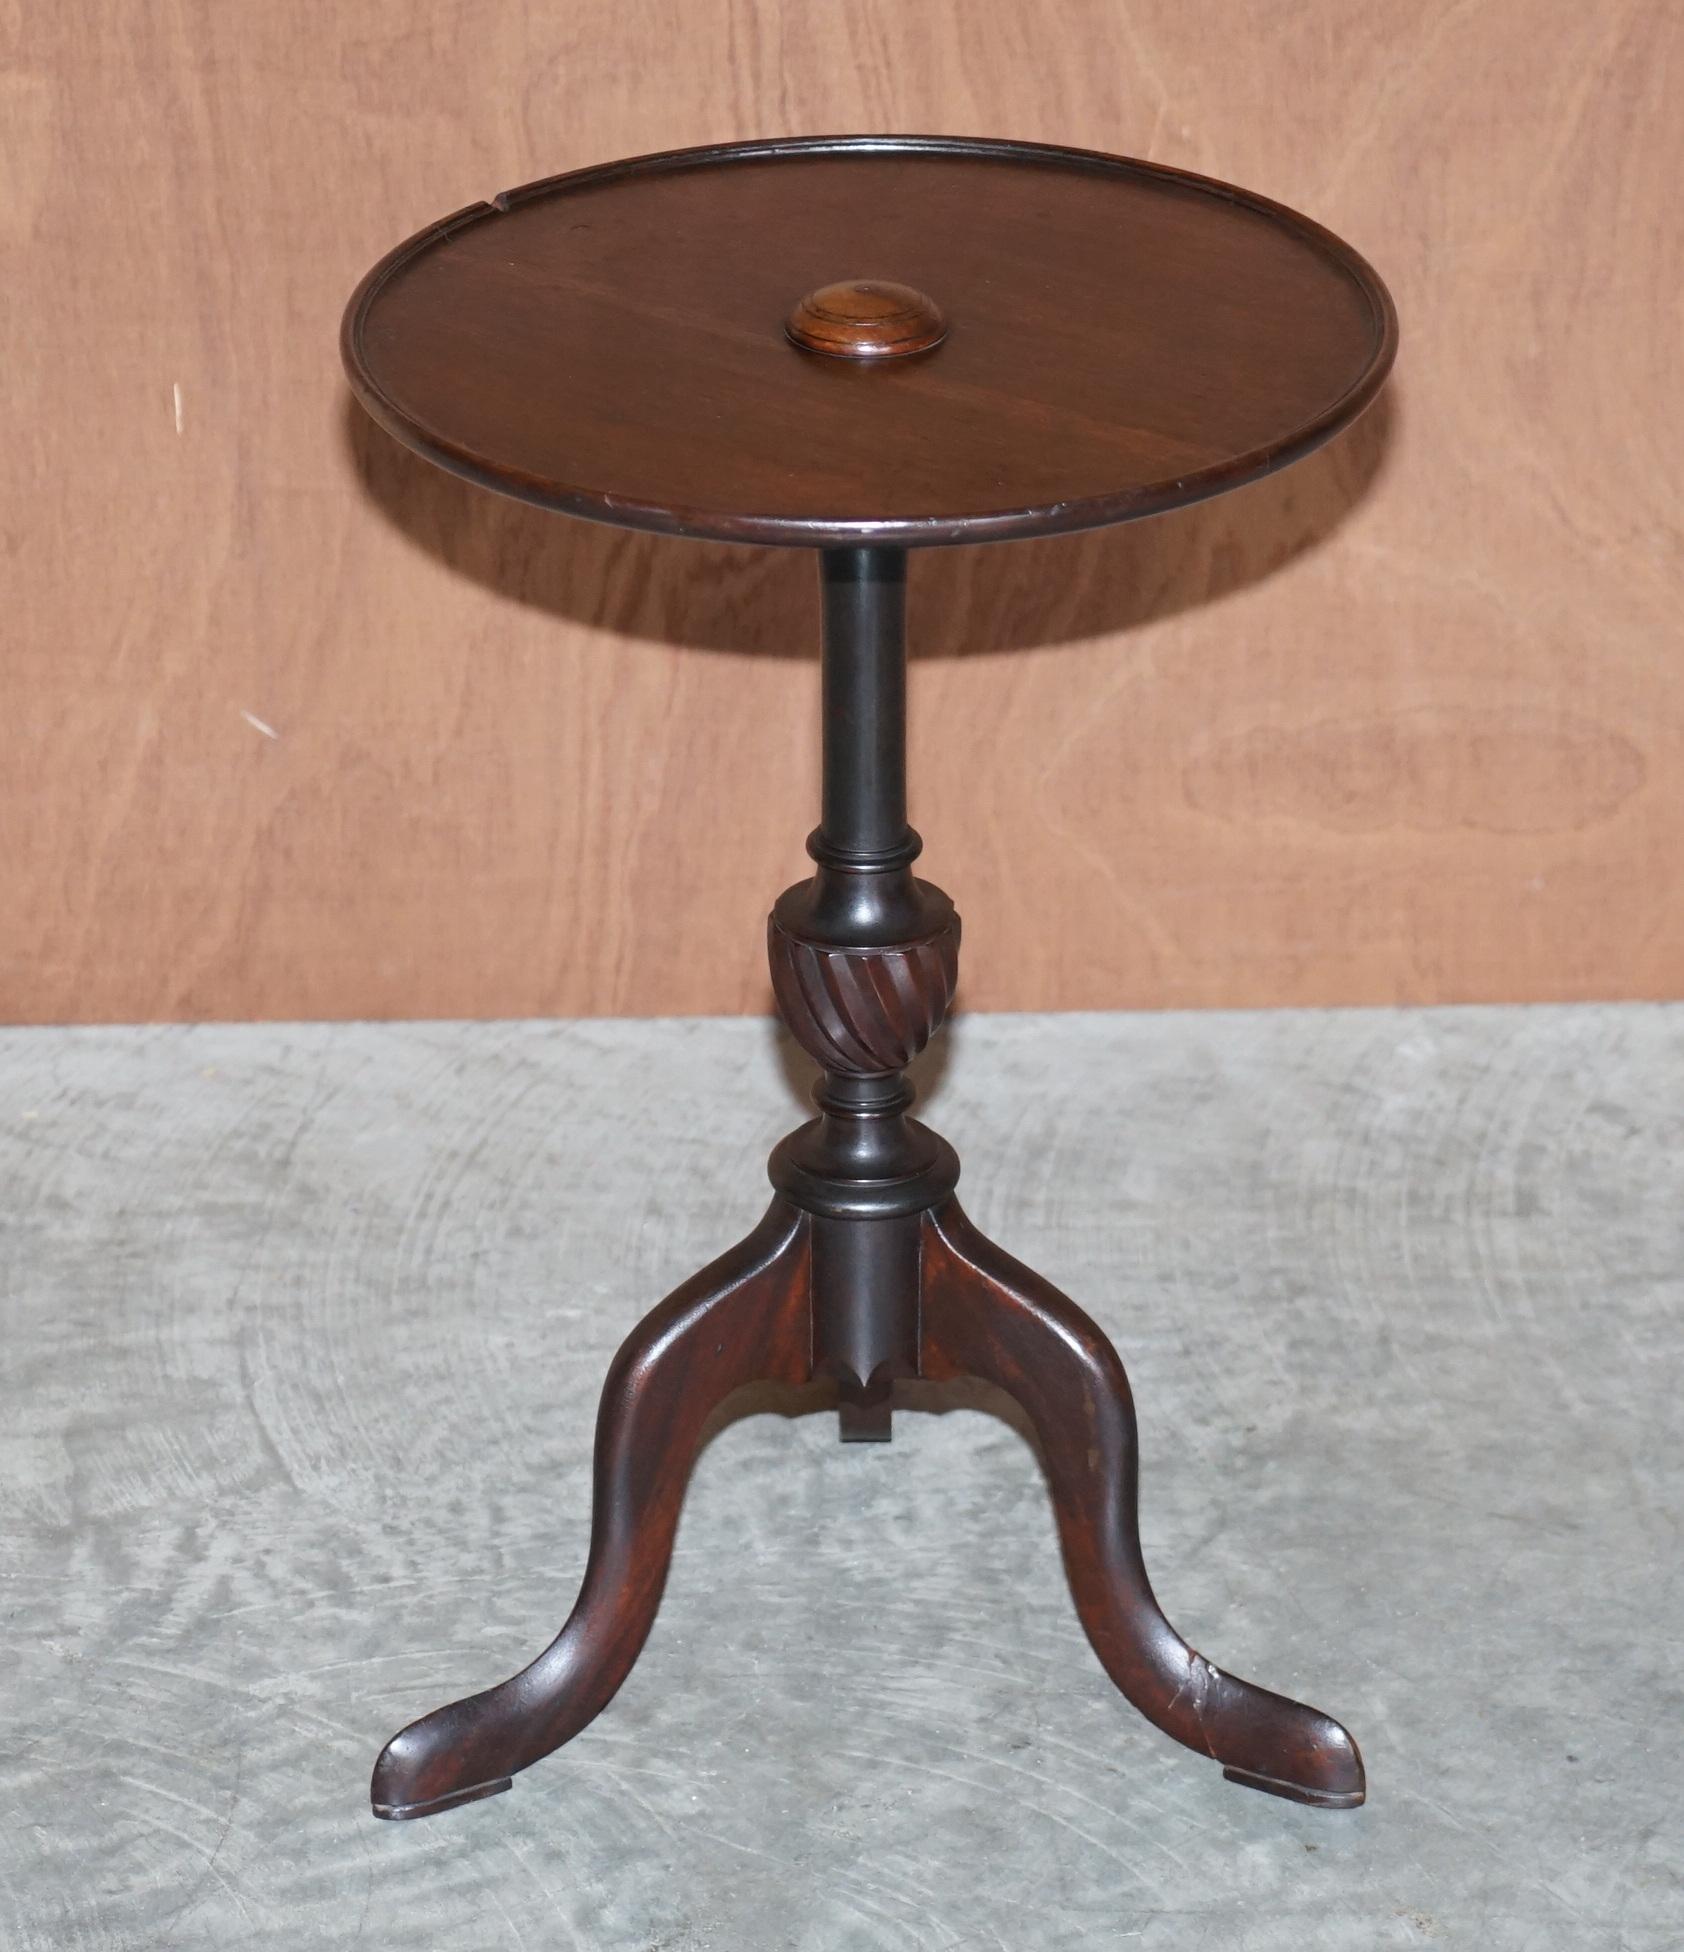 We are delighted to offer for sale this lovely antique rich Mahogany lamp or side table with nicely turned column base which is late Georgian to early Victorian with serial number stamped base 

A good-looking well-made tripod table in nice